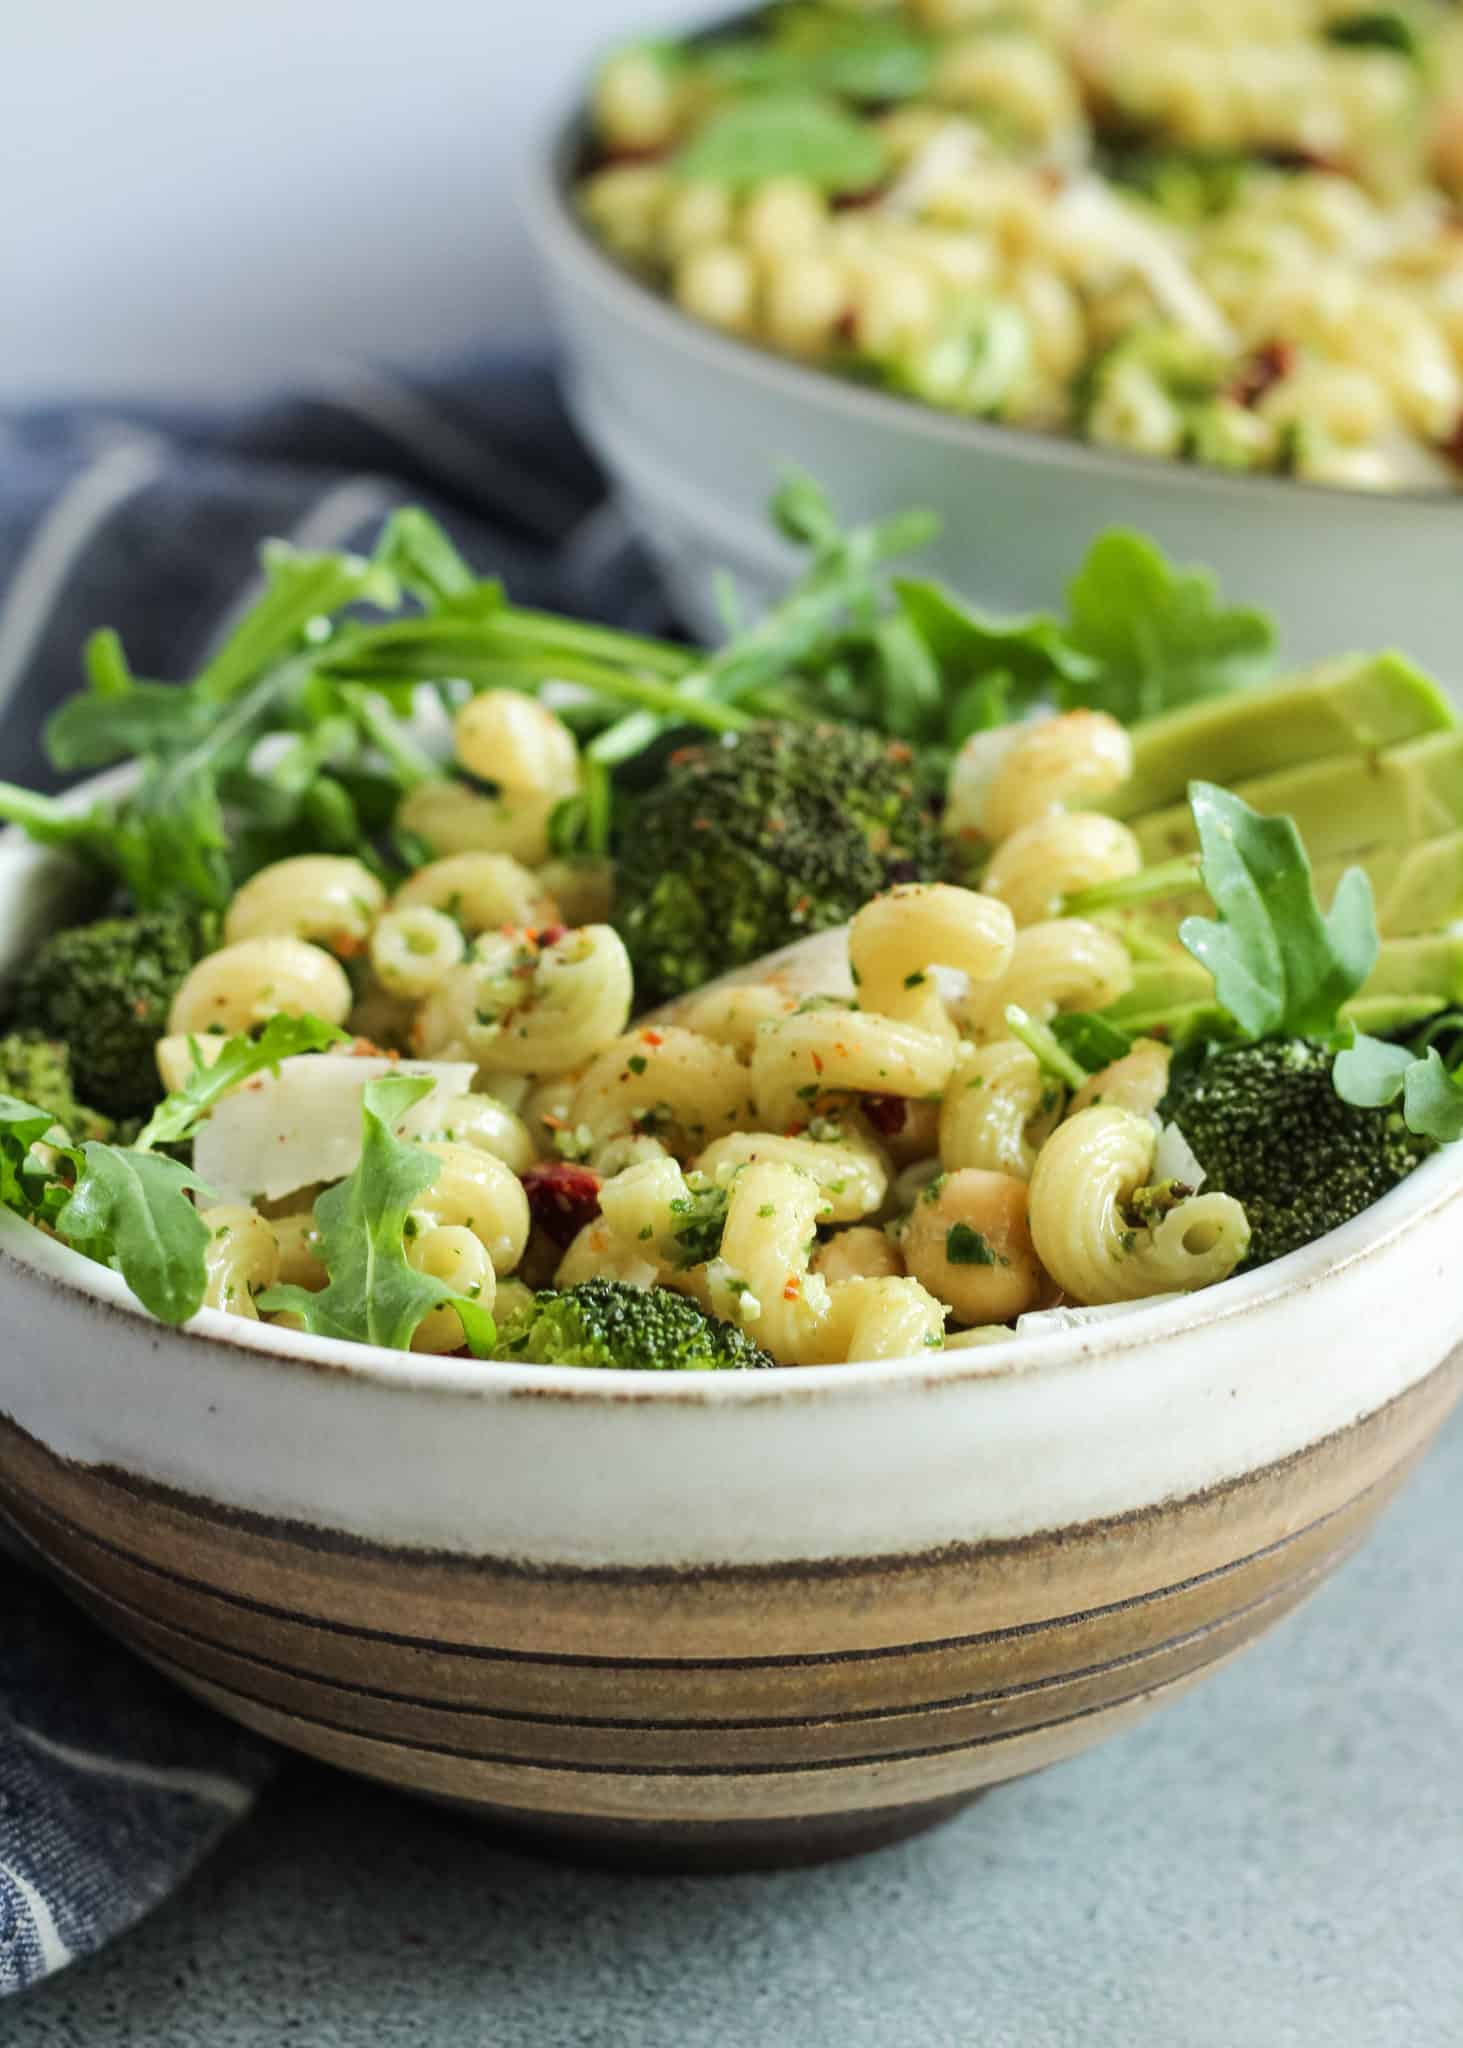 Easy Pesto Pasta Salad with Sun Dried Tomatoes from Street Smart Nutrition